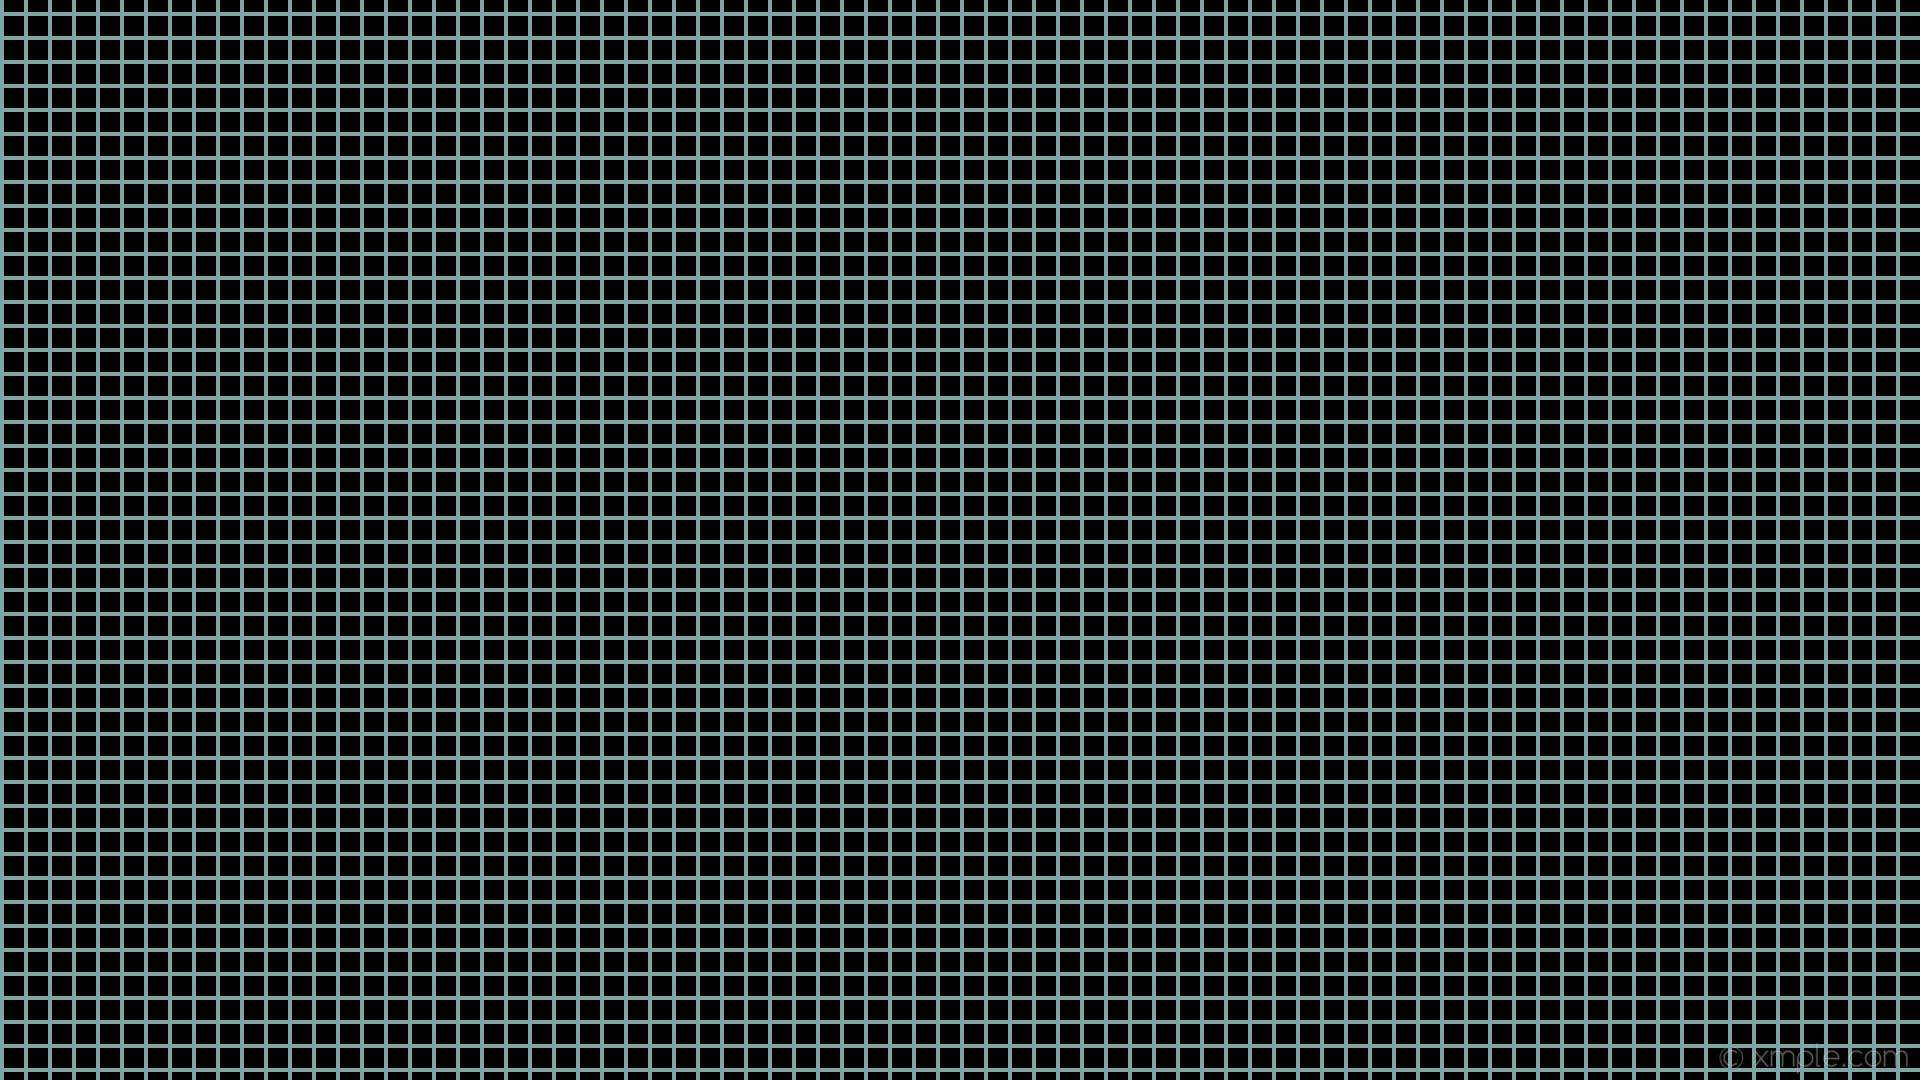 1920x1080 wallpaper graph paper blue black grid pale turquoise #000000 #afeeee 0Â° 4px  24px